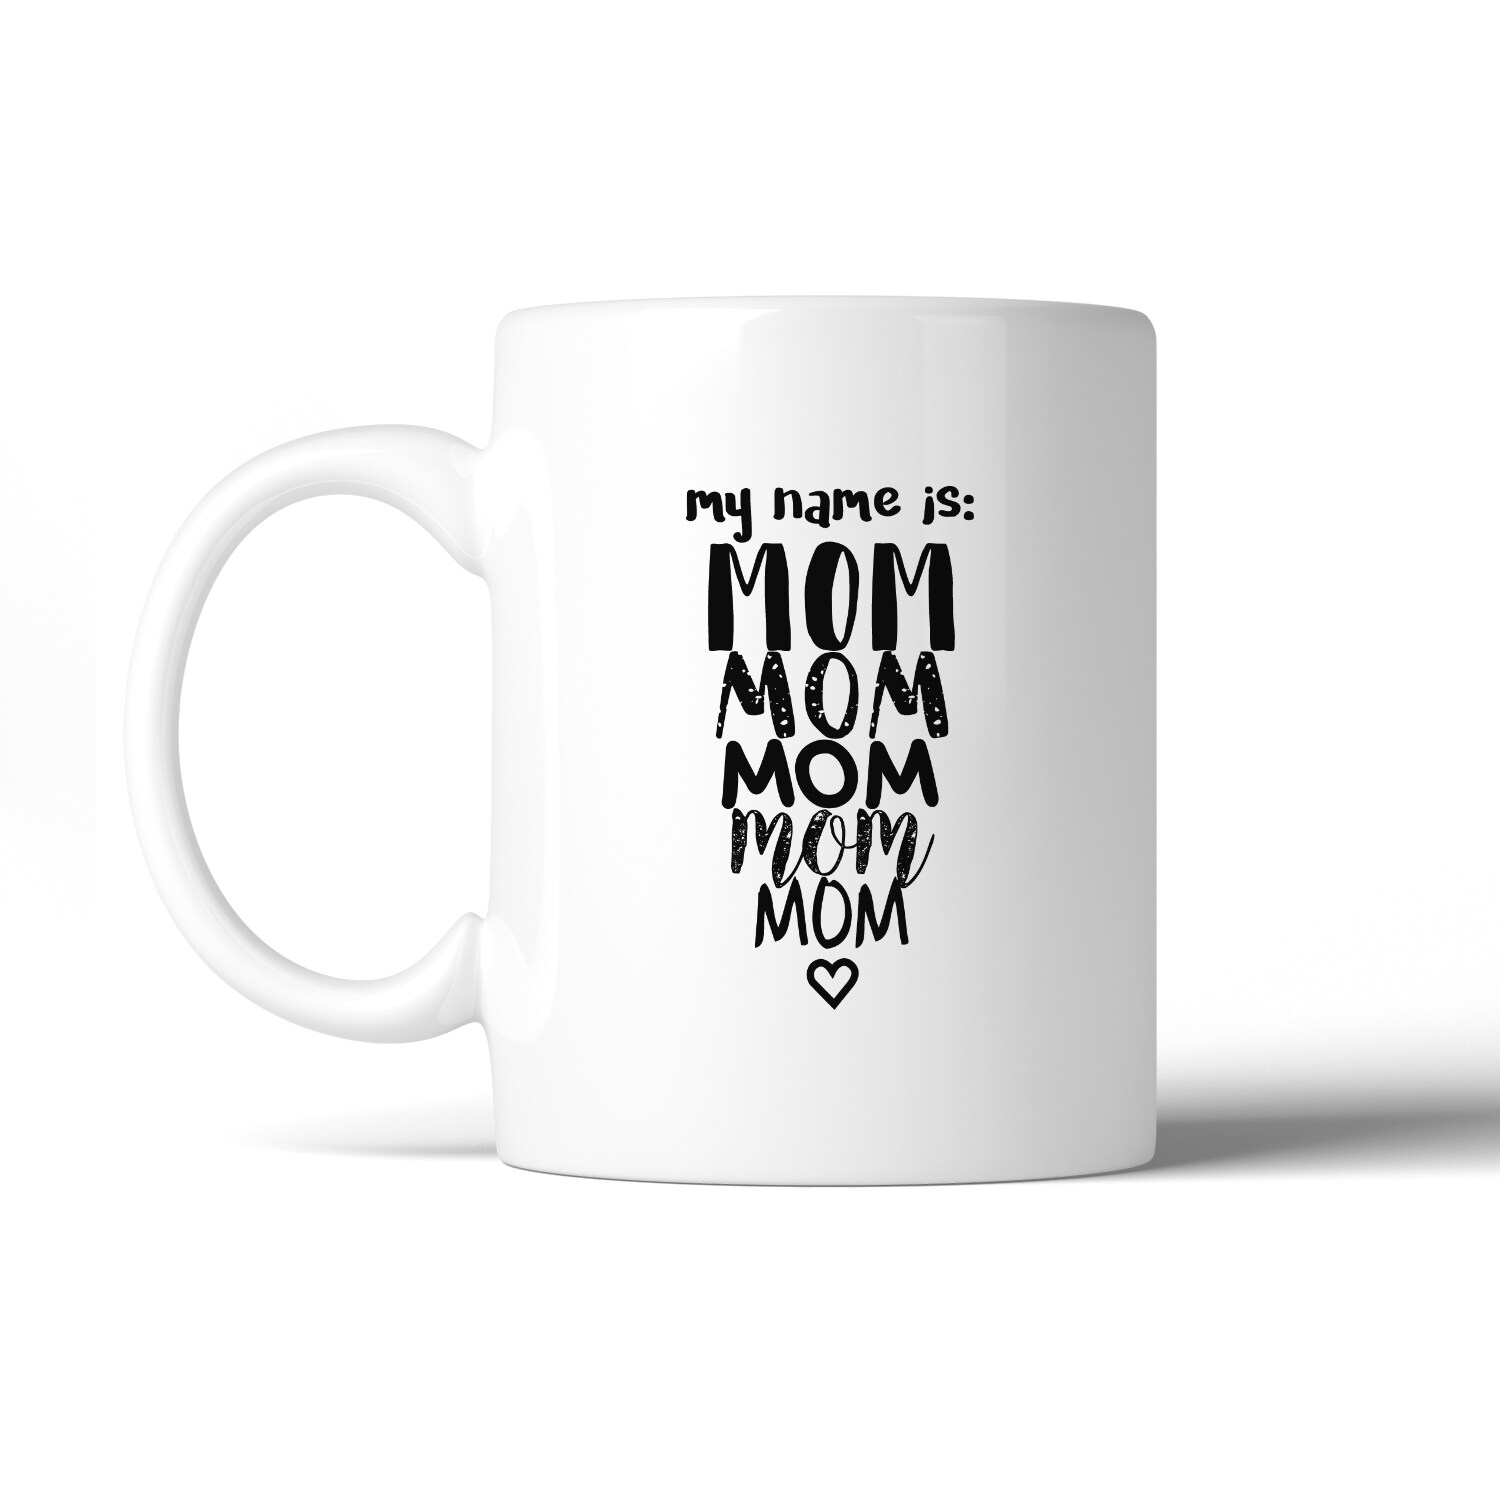 https://ak1.ostkcdn.com/images/products/is/images/direct/9a1c191869ad914602cd4ae8ab3f04de936ba941/My-Name-Is-Mom-Ceramic-Coffee-Mug-11-oz-Cute-Design-Gifts-For-Moms.jpg